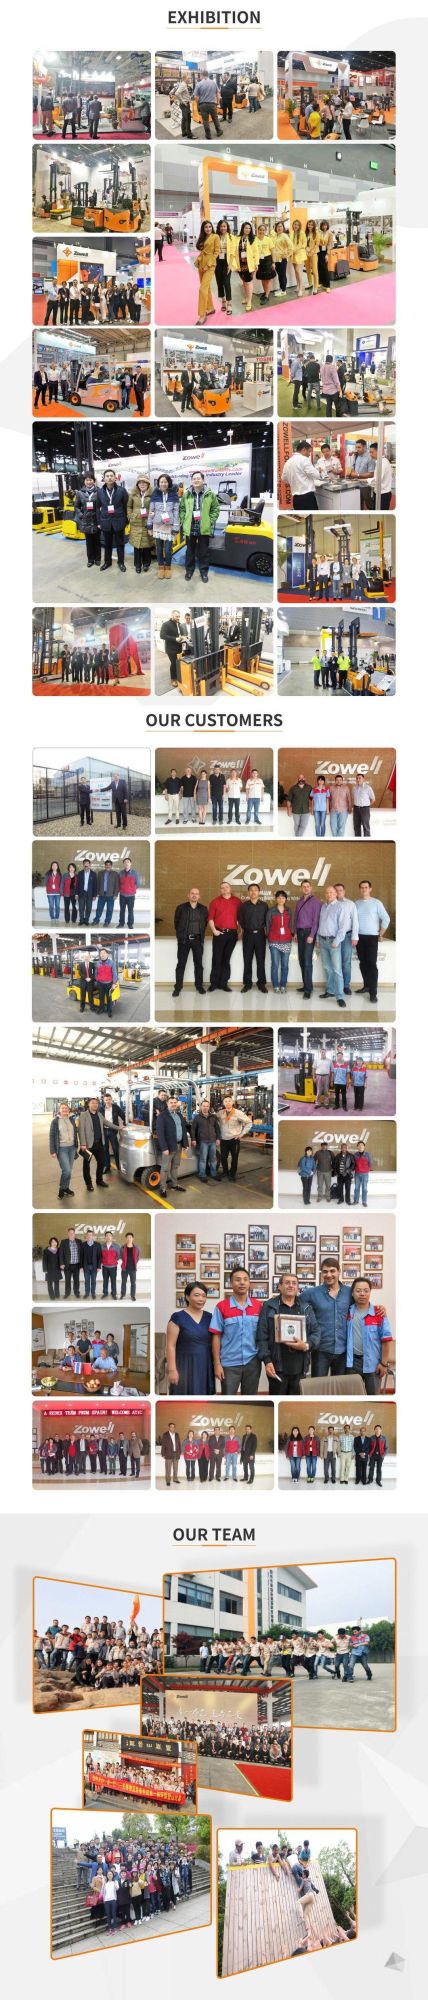 High Performance ISO 9001 Approved Self-Propelled Zowell Platform Hydraulic Scissor Lift Aerial Operation